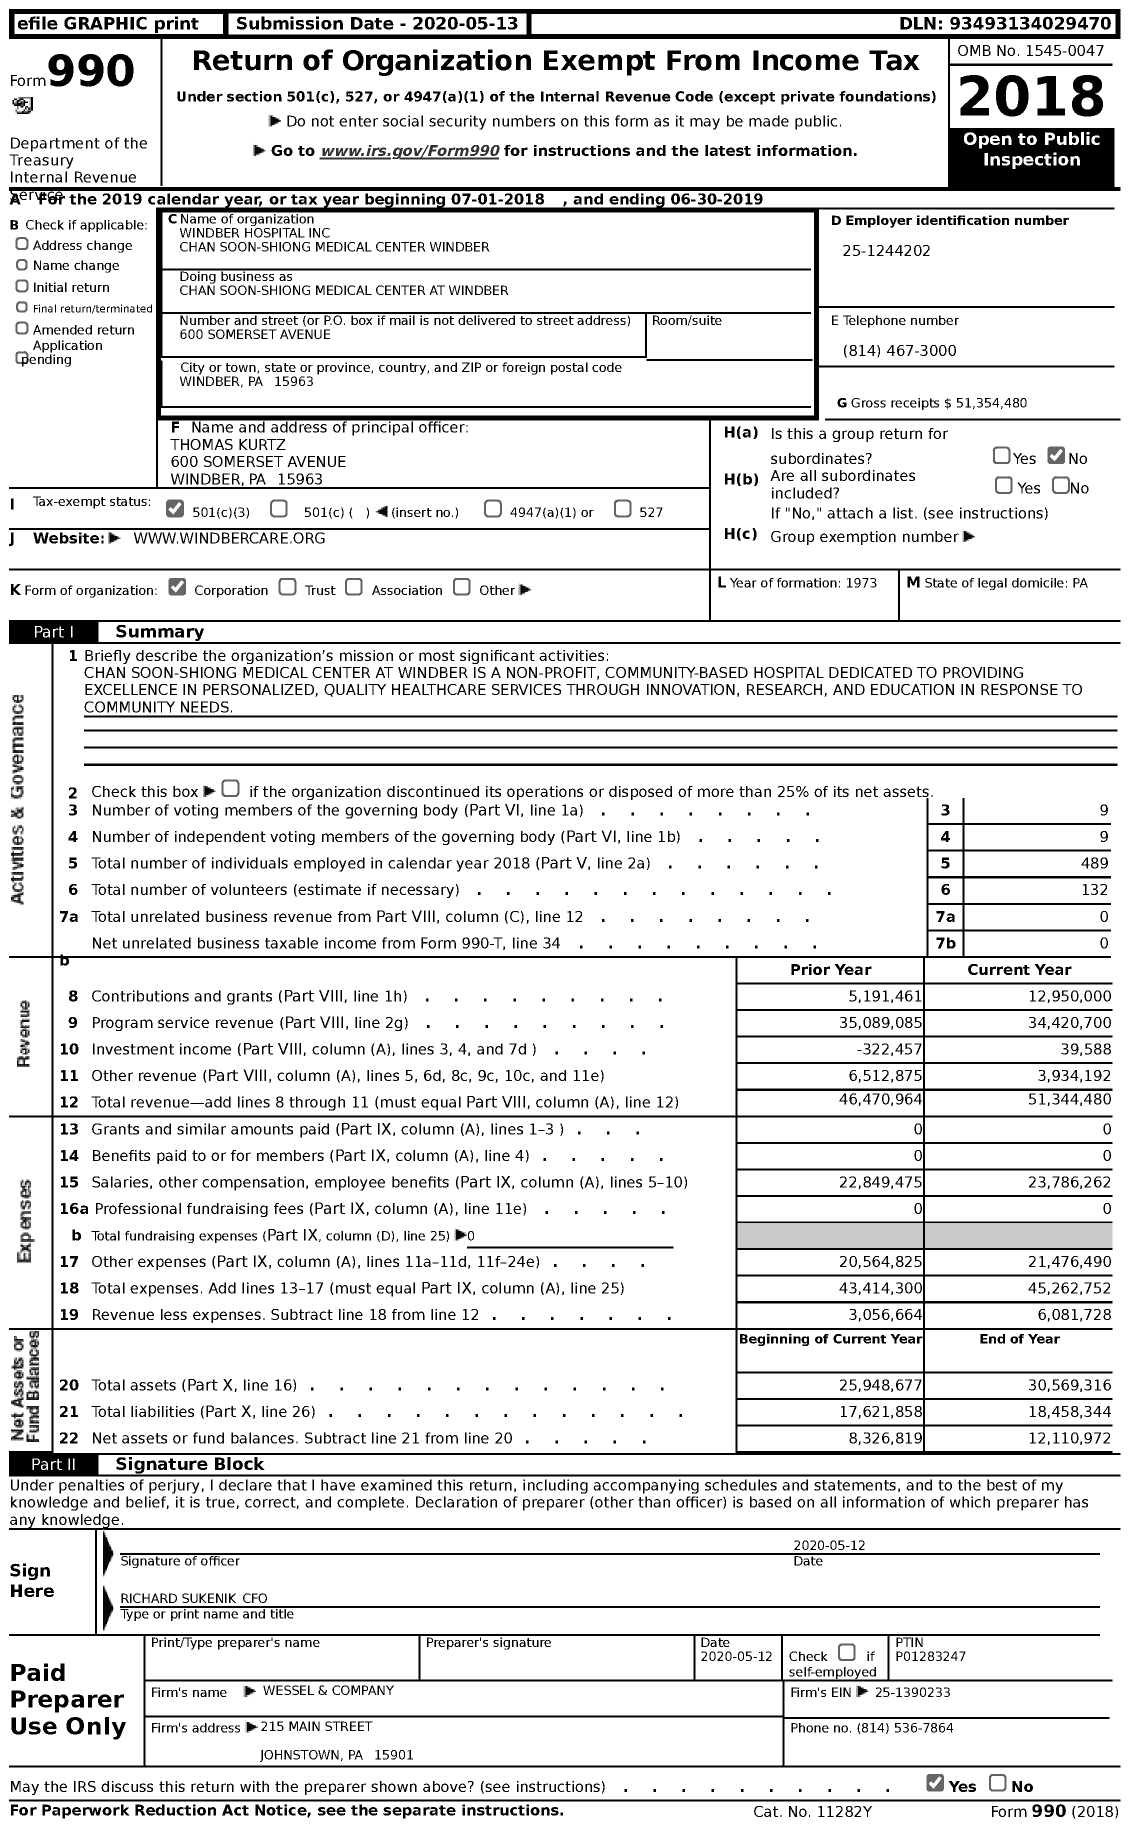 Image of first page of 2018 Form 990 for Chan Soon-Shiong Medical Center at Windber (CSSMCW)